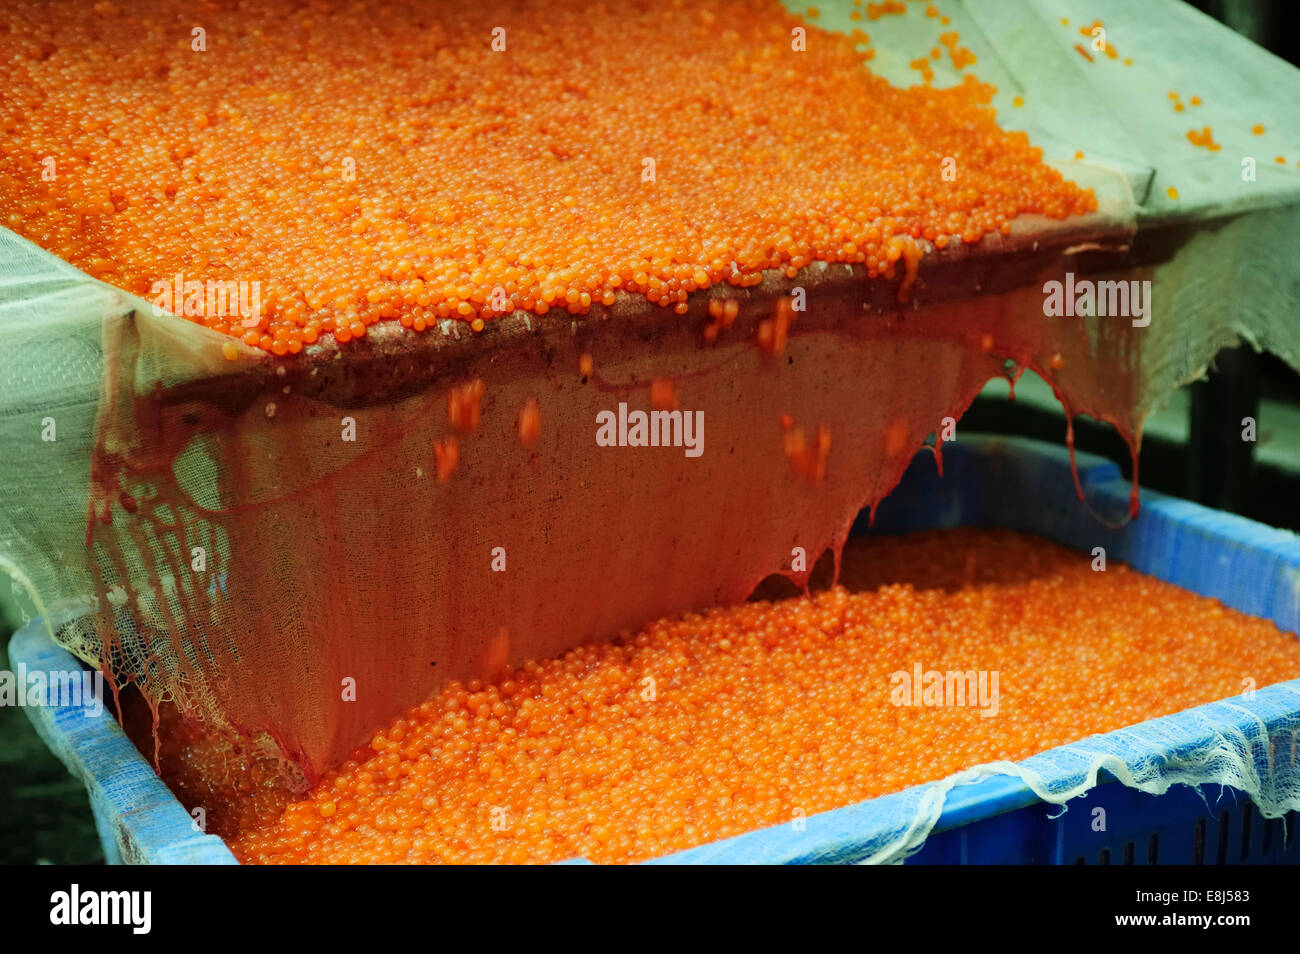 Salmon caviar, Russian specialty, being cleaned in a washing process, Kamchatka Peninsula, Russia Stock Photo